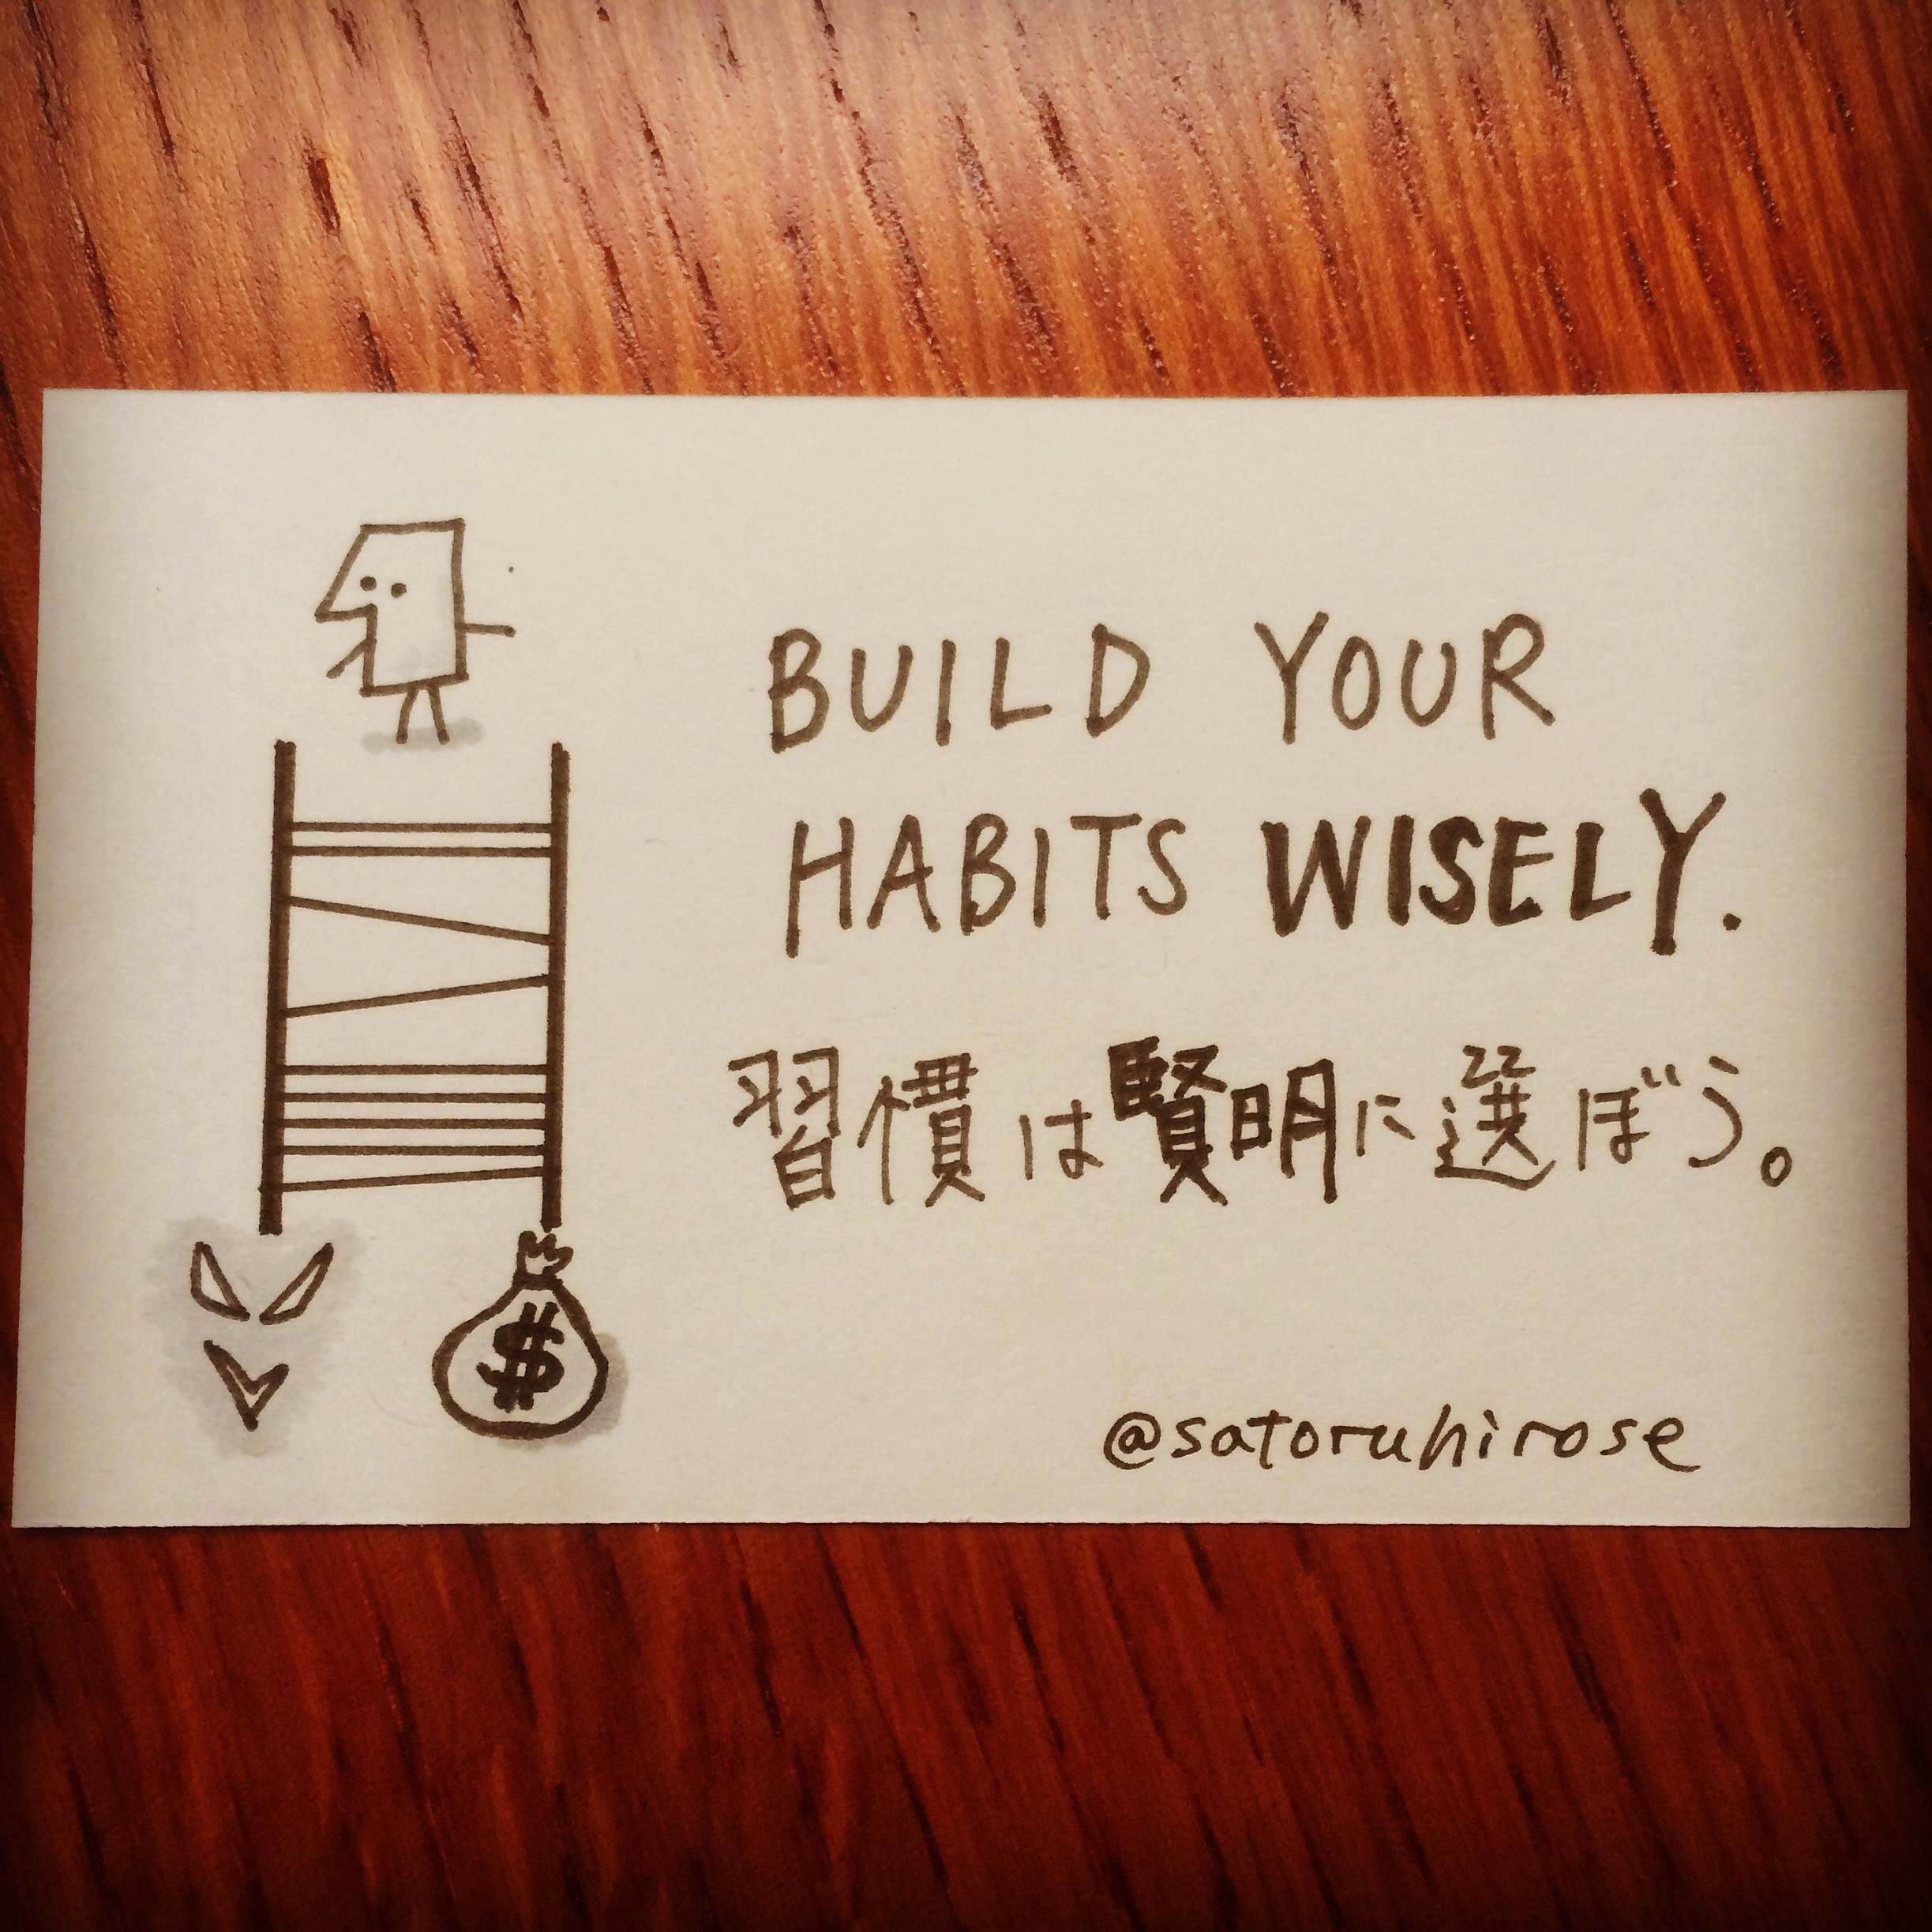 Build your habit wisely.